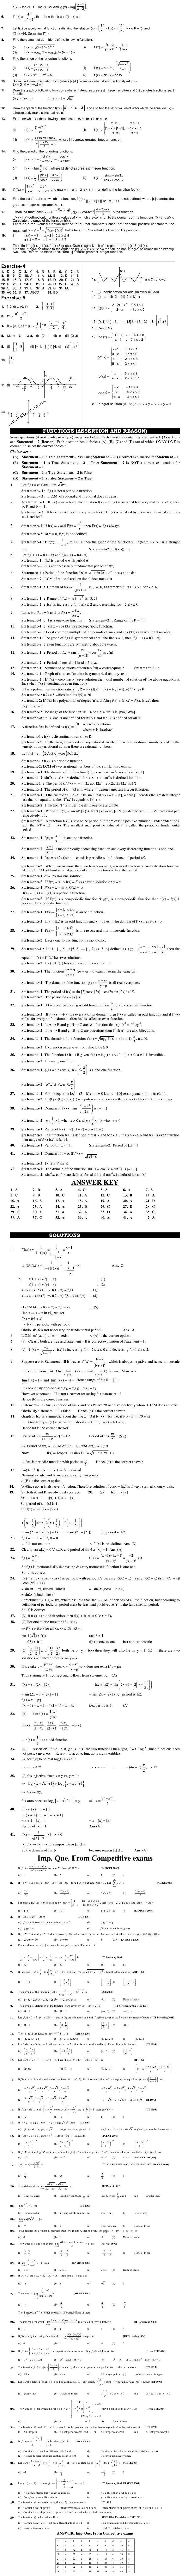 Maths Study Material - Chapter 7